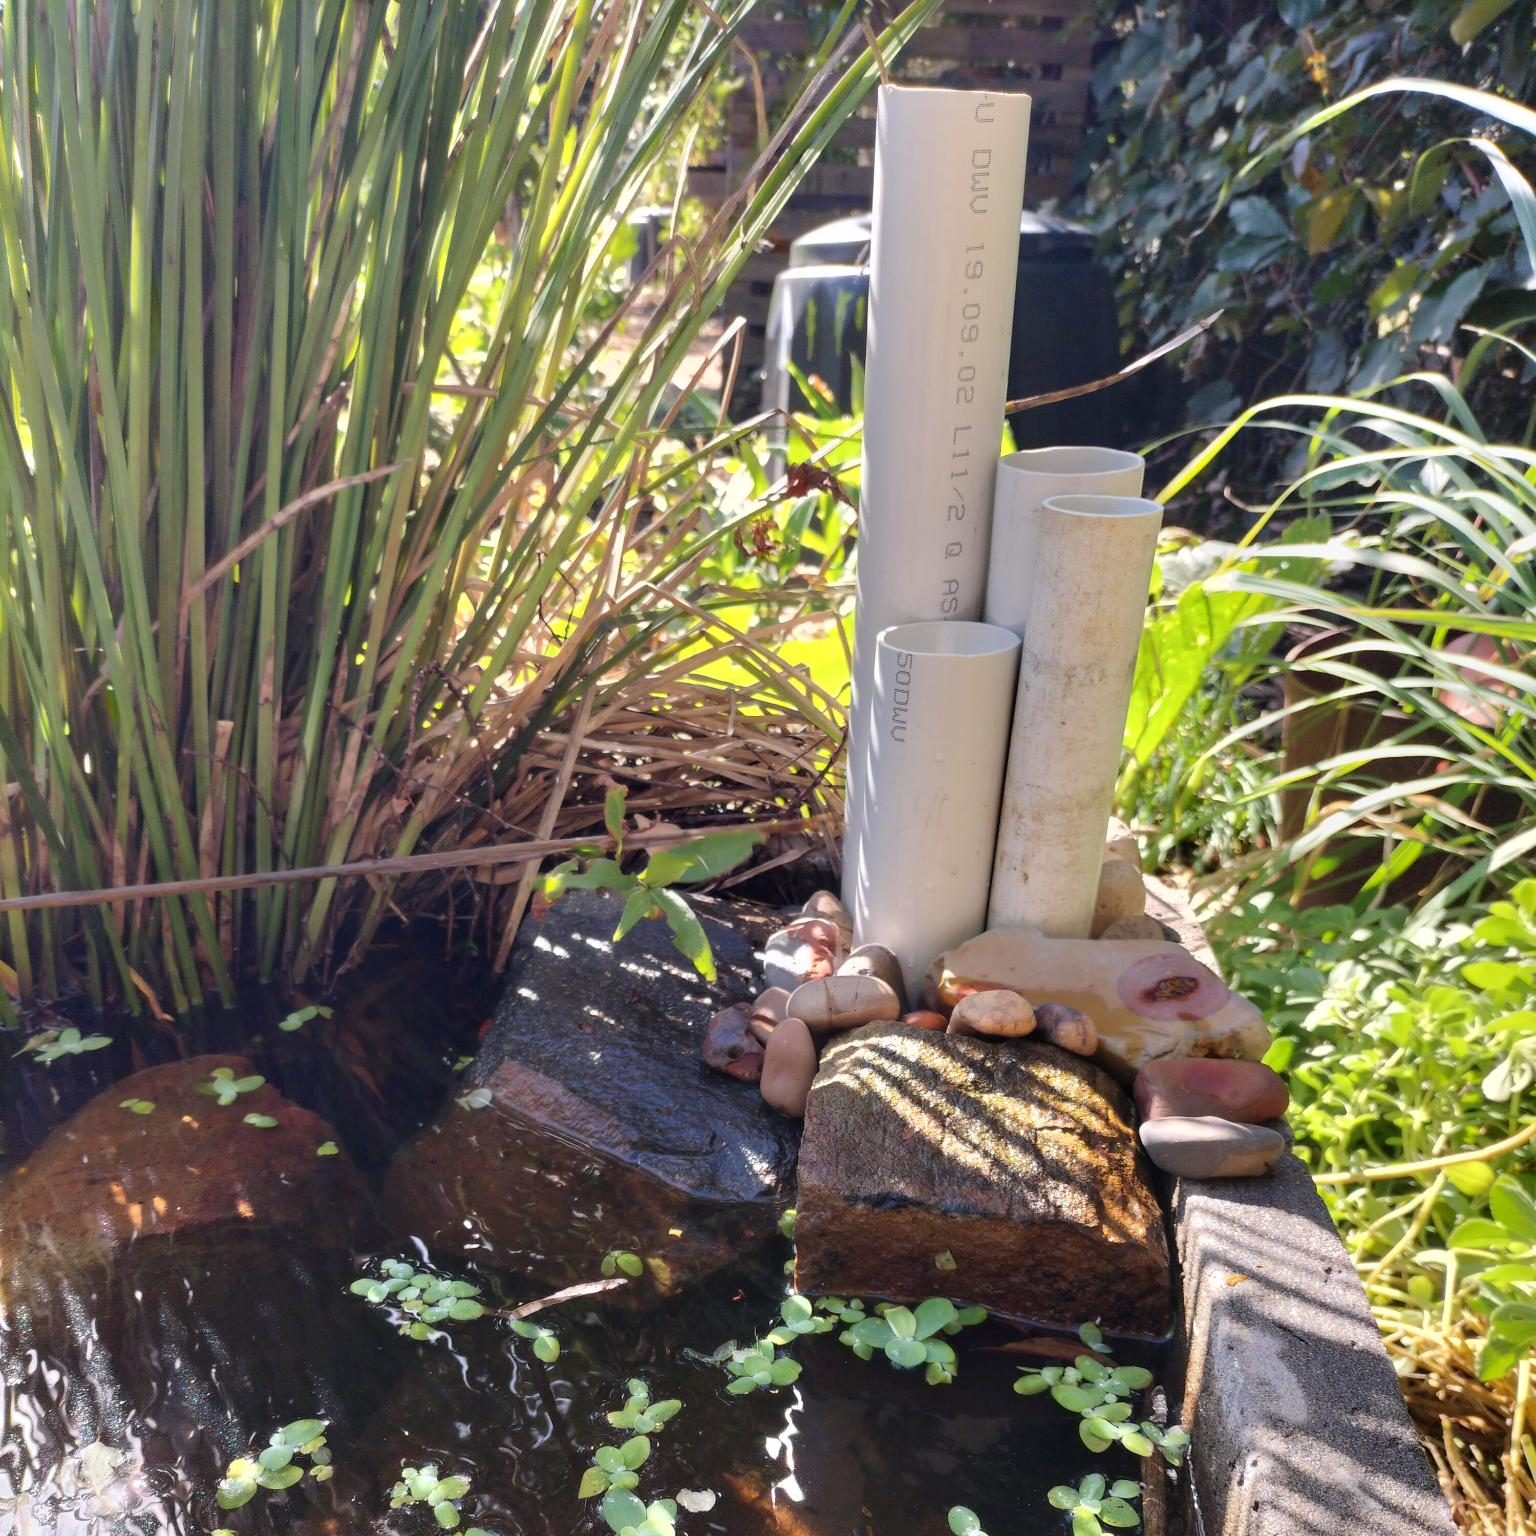 A pond with some pvc pipes sticking up vertically